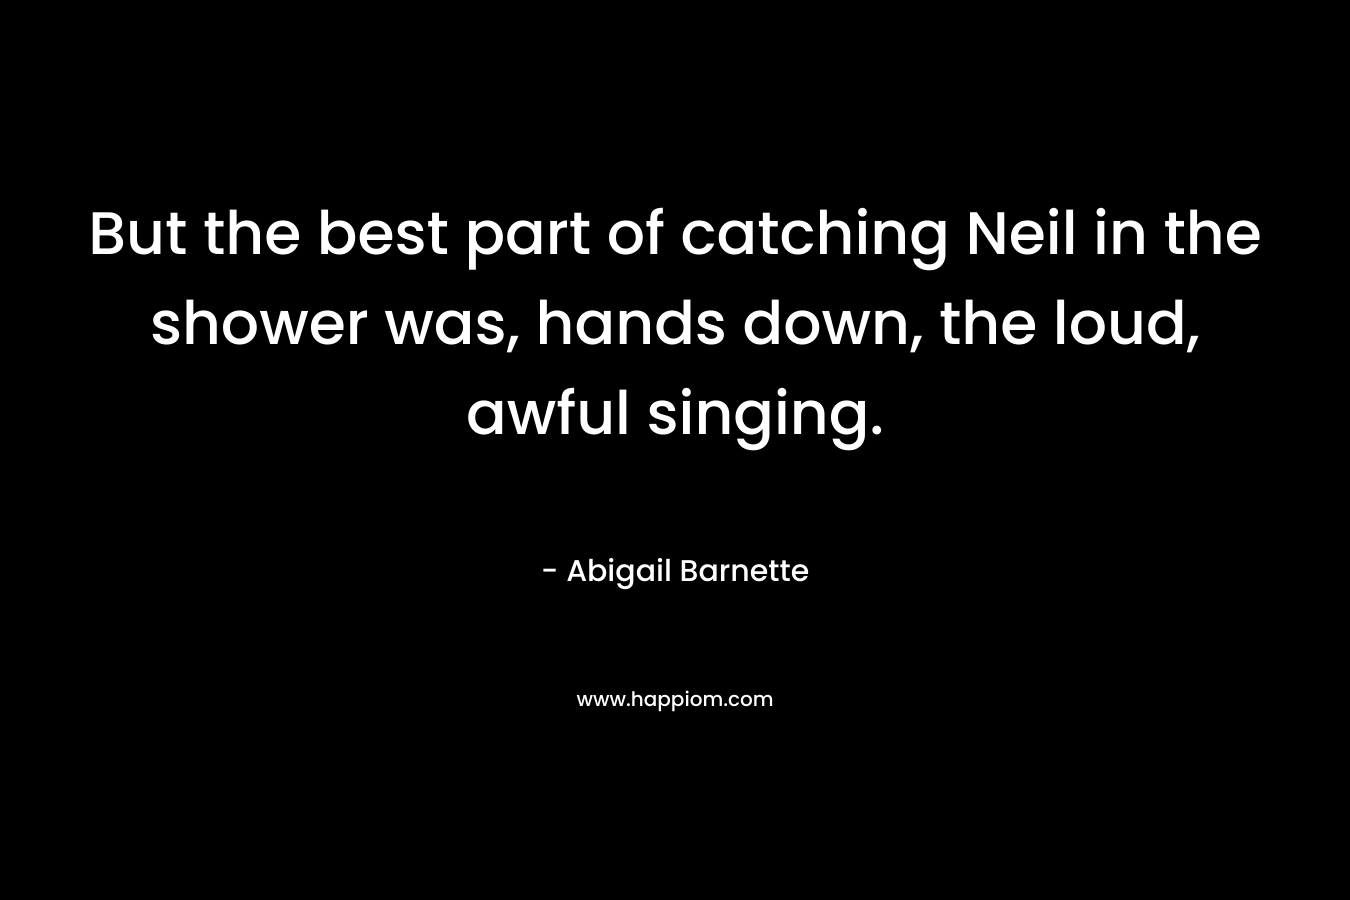 But the best part of catching Neil in the shower was, hands down, the loud, awful singing. – Abigail Barnette